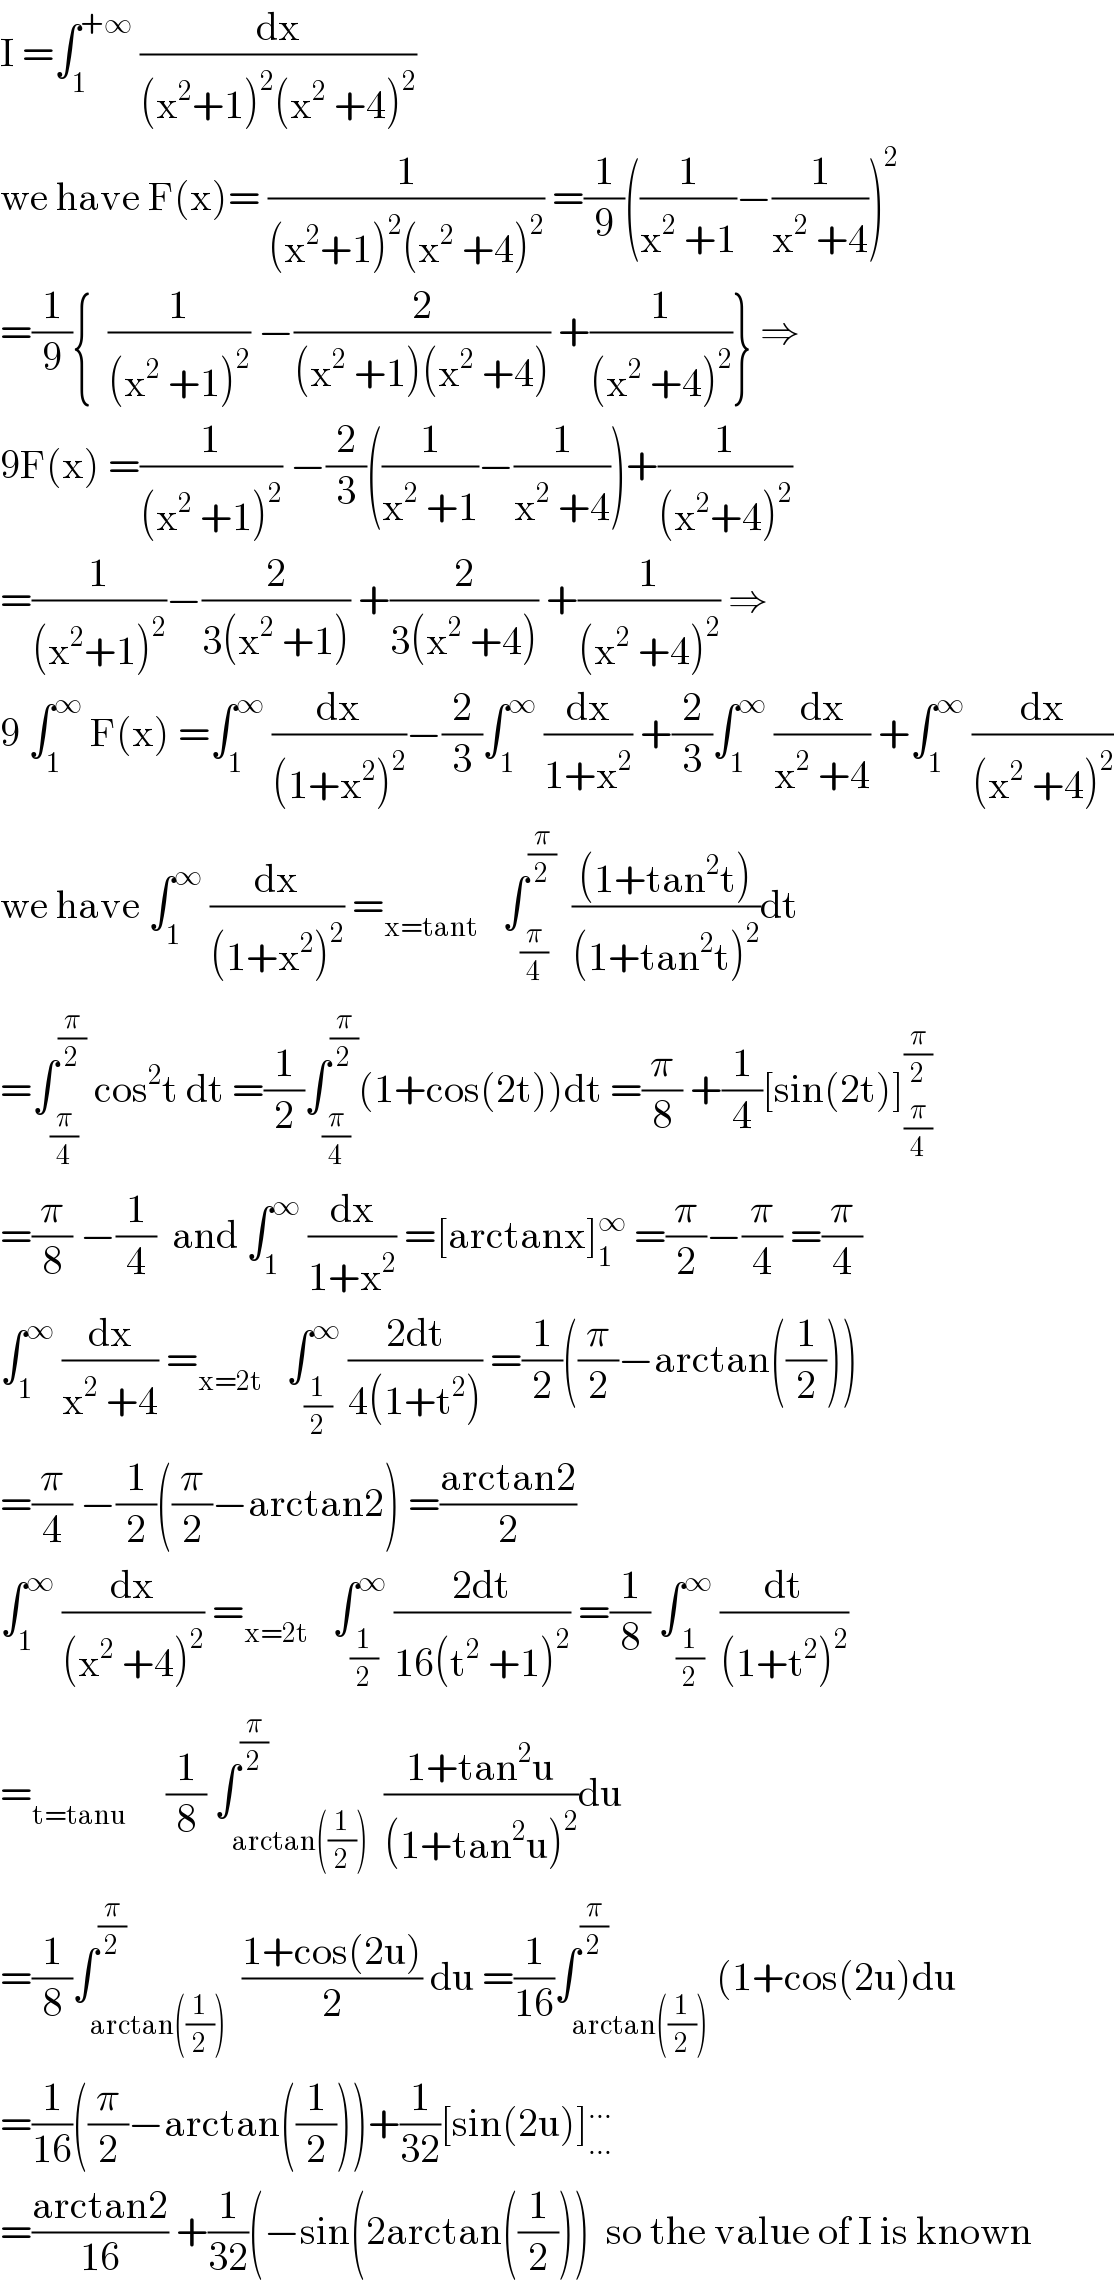 I =∫_1 ^(+∞)  (dx/((x^2 +1)^2 (x^2  +4)^2 ))  we have F(x)= (1/((x^2 +1)^2 (x^2  +4)^2 )) =(1/9)((1/(x^2  +1))−(1/(x^2  +4)))^2   =(1/9){  (1/((x^2  +1)^2 )) −(2/((x^2  +1)(x^2  +4))) +(1/((x^2  +4)^2 ))} ⇒  9F(x) =(1/((x^2  +1)^2 )) −(2/3)((1/(x^2  +1))−(1/(x^2  +4)))+(1/((x^2 +4)^2 ))  =(1/((x^2 +1)^2 ))−(2/(3(x^2  +1))) +(2/(3(x^2  +4))) +(1/((x^2  +4)^2 )) ⇒  9 ∫_1 ^∞  F(x) =∫_1 ^∞  (dx/((1+x^2 )^2 ))−(2/3)∫_1 ^∞  (dx/(1+x^2 )) +(2/3)∫_1 ^∞  (dx/(x^2  +4)) +∫_1 ^∞  (dx/((x^2  +4)^2 ))  we have ∫_1 ^∞  (dx/((1+x^2 )^2 )) =_(x=tant)    ∫_(π/4) ^(π/2)   (((1+tan^2 t))/((1+tan^2 t)^2 ))dt  =∫_(π/4) ^(π/2)  cos^2 t dt =(1/2)∫_(π/4) ^(π/2) (1+cos(2t))dt =(π/8) +(1/4)[sin(2t)]_(π/4) ^(π/2)   =(π/8) −(1/4)  and ∫_1 ^∞  (dx/(1+x^2 )) =[arctanx]_1 ^∞  =(π/2)−(π/4) =(π/4)  ∫_1 ^∞  (dx/(x^2  +4)) =_(x=2t)    ∫_(1/2) ^∞  ((2dt)/(4(1+t^2 ))) =(1/2)((π/2)−arctan((1/2)))  =(π/4) −(1/2)((π/2)−arctan2) =((arctan2)/2)  ∫_1 ^∞  (dx/((x^2  +4)^2 )) =_(x=2t)    ∫_(1/2) ^∞  ((2dt)/(16(t^2  +1)^2 )) =(1/8) ∫_(1/2) ^∞  (dt/((1+t^2 )^2 ))  =_(t=tanu)      (1/8) ∫_(arctan((1/2))) ^(π/2)  ((1+tan^2 u)/((1+tan^2 u)^2 ))du  =(1/8)∫_(arctan((1/2))) ^(π/2)  ((1+cos(2u))/2) du =(1/(16))∫_(arctan((1/2))) ^(π/2) (1+cos(2u)du  =(1/(16))((π/2)−arctan((1/2)))+(1/(32))[sin(2u)]_(...) ^(...)   =((arctan2)/(16)) +(1/(32))(−sin(2arctan((1/2)))  so the value of I is known  